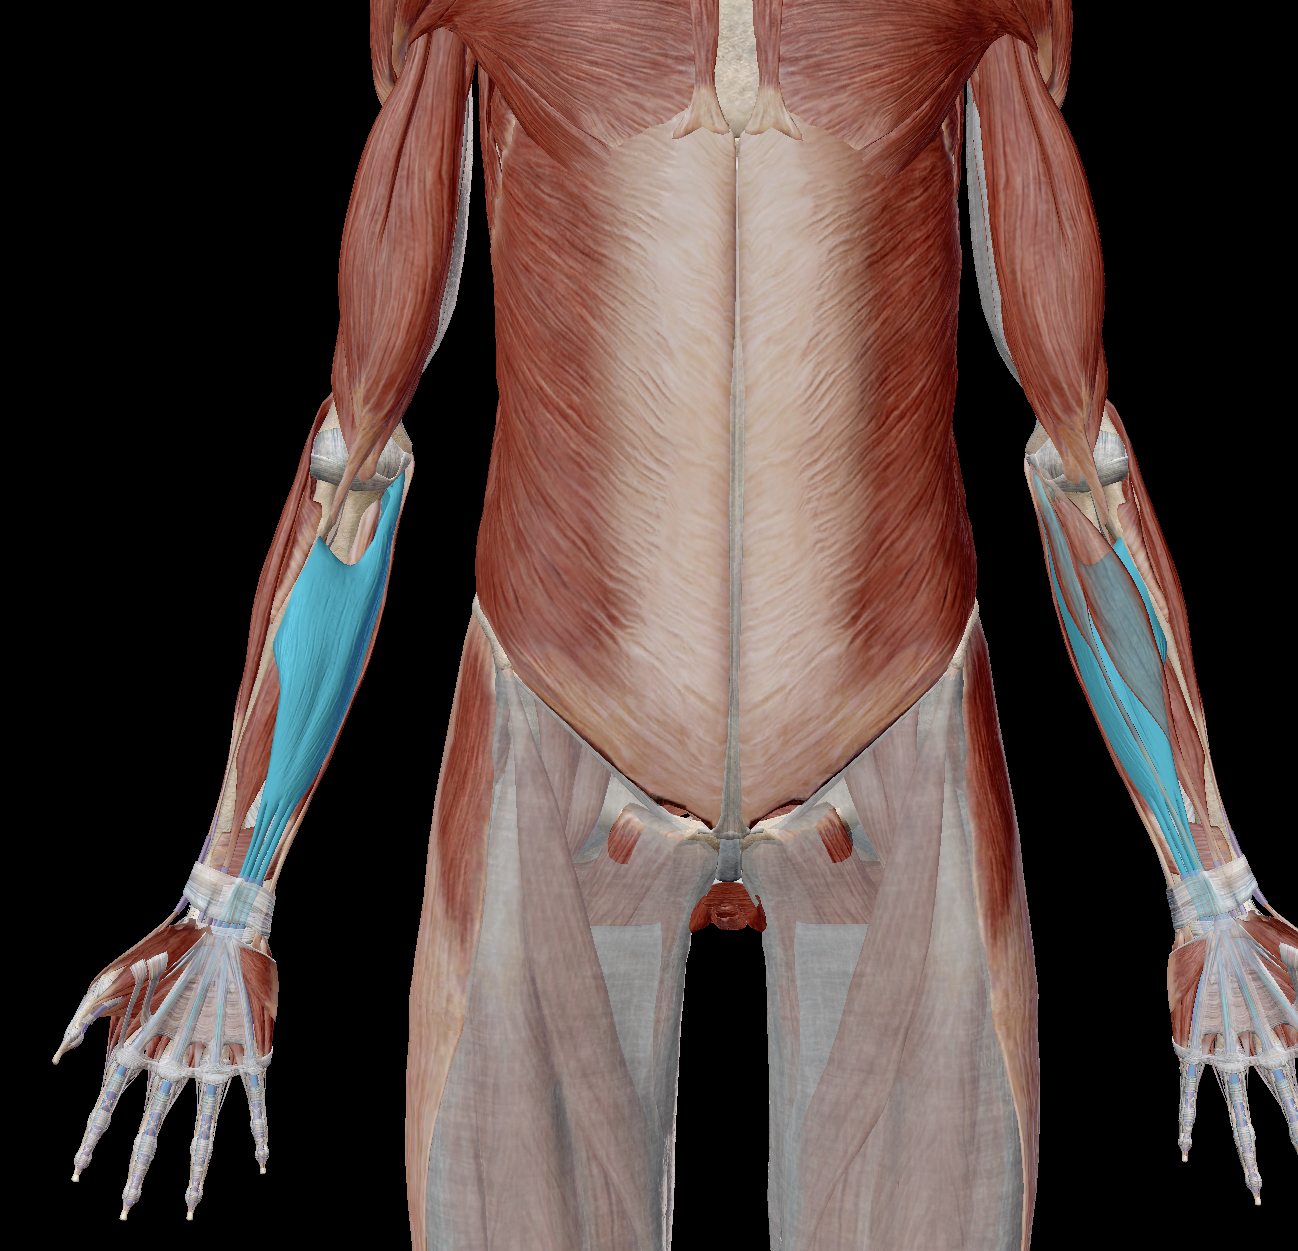 <p>What are the components of the intermediate layer of the anterior forearm?</p>